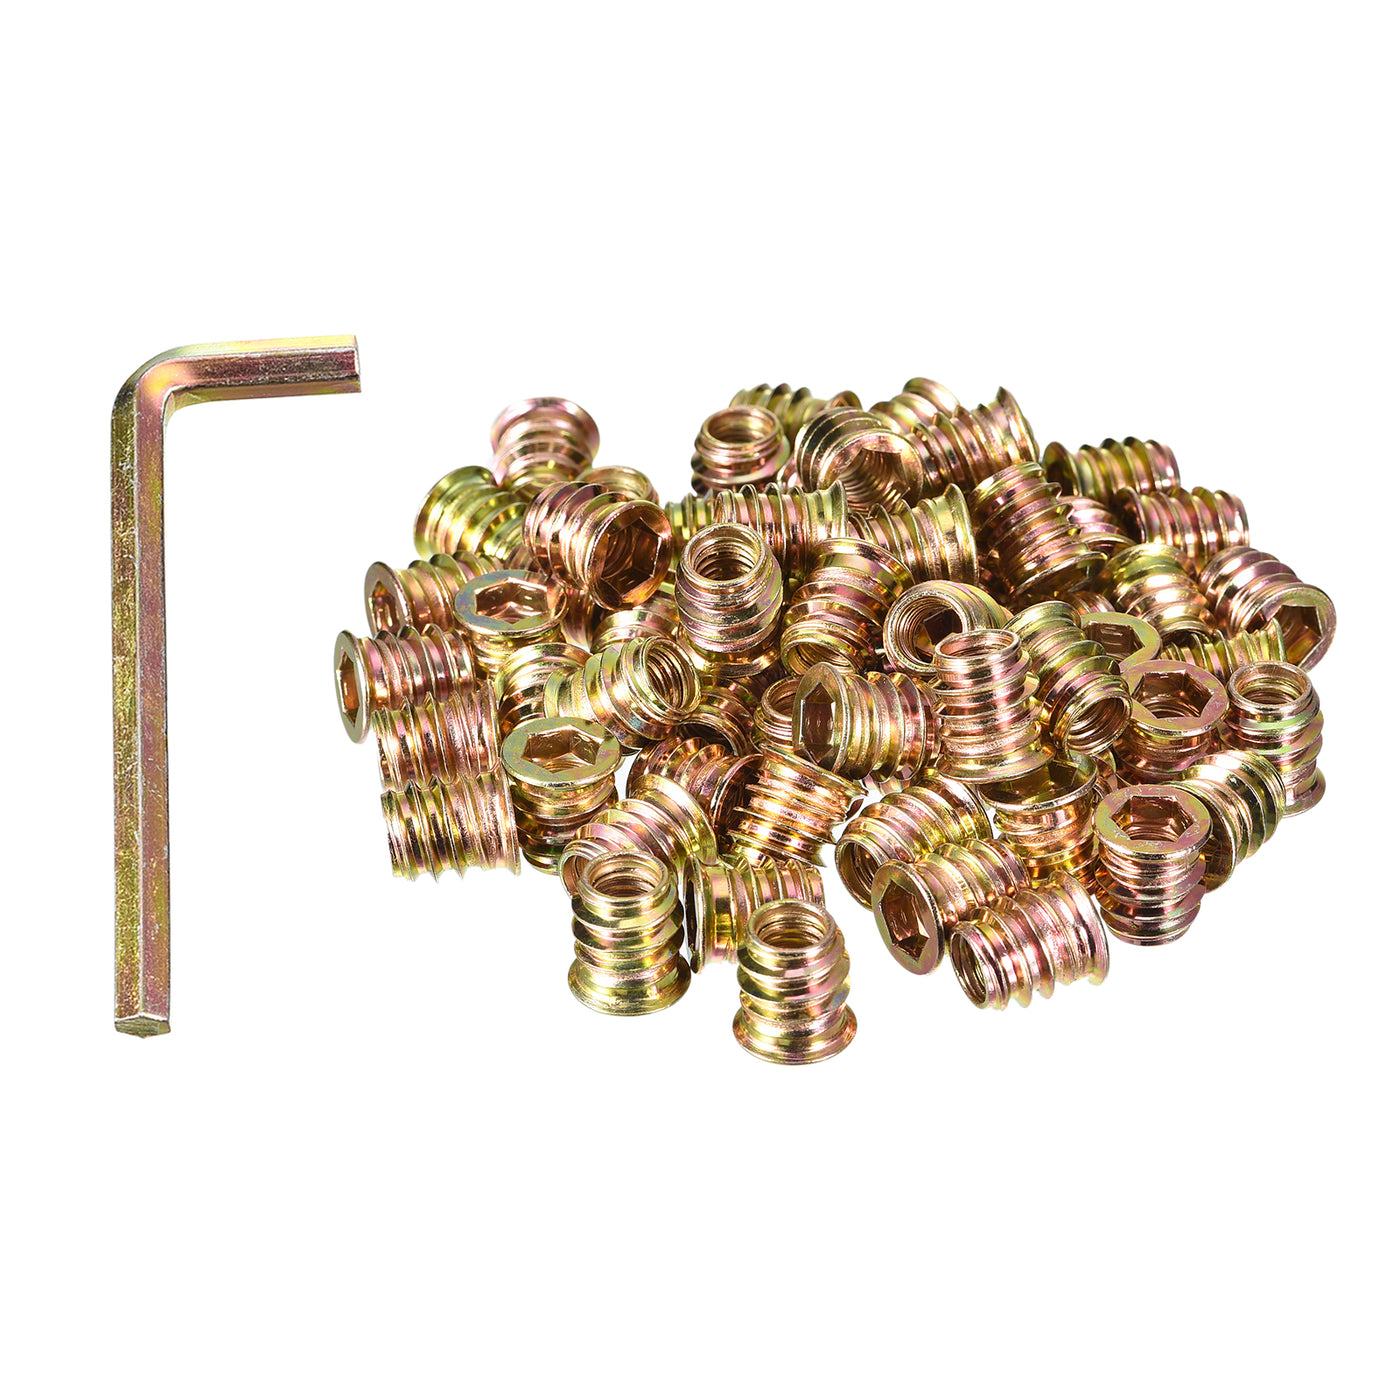 uxcell Uxcell Threaded Inserts Nuts Threaded Inserts for Wood Furniture, Wood Insert Nuts with Hex Wrench